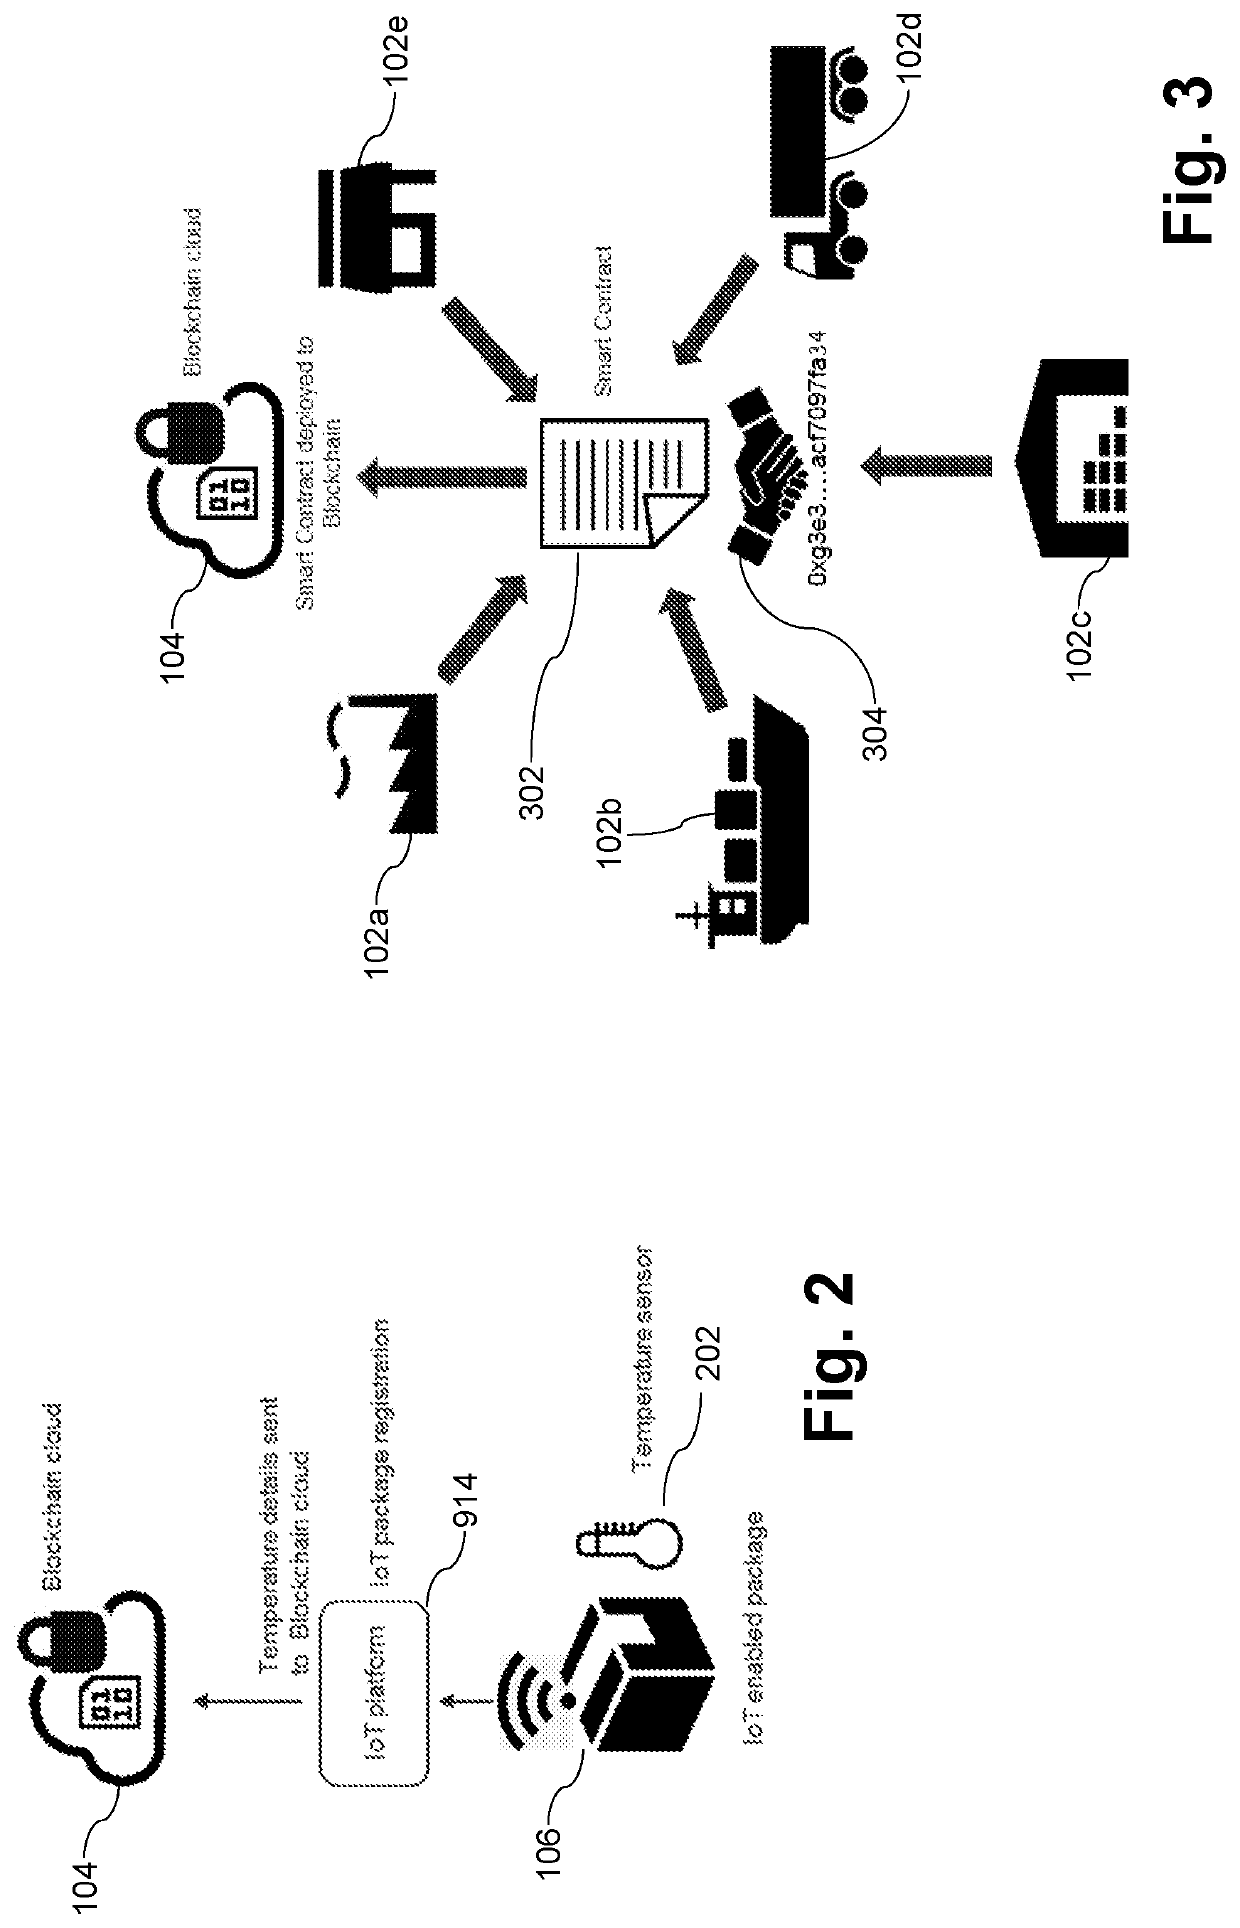 Systems and/or methods for securing and automating process management systems using distributed sensors and distributed ledger of digital transactions